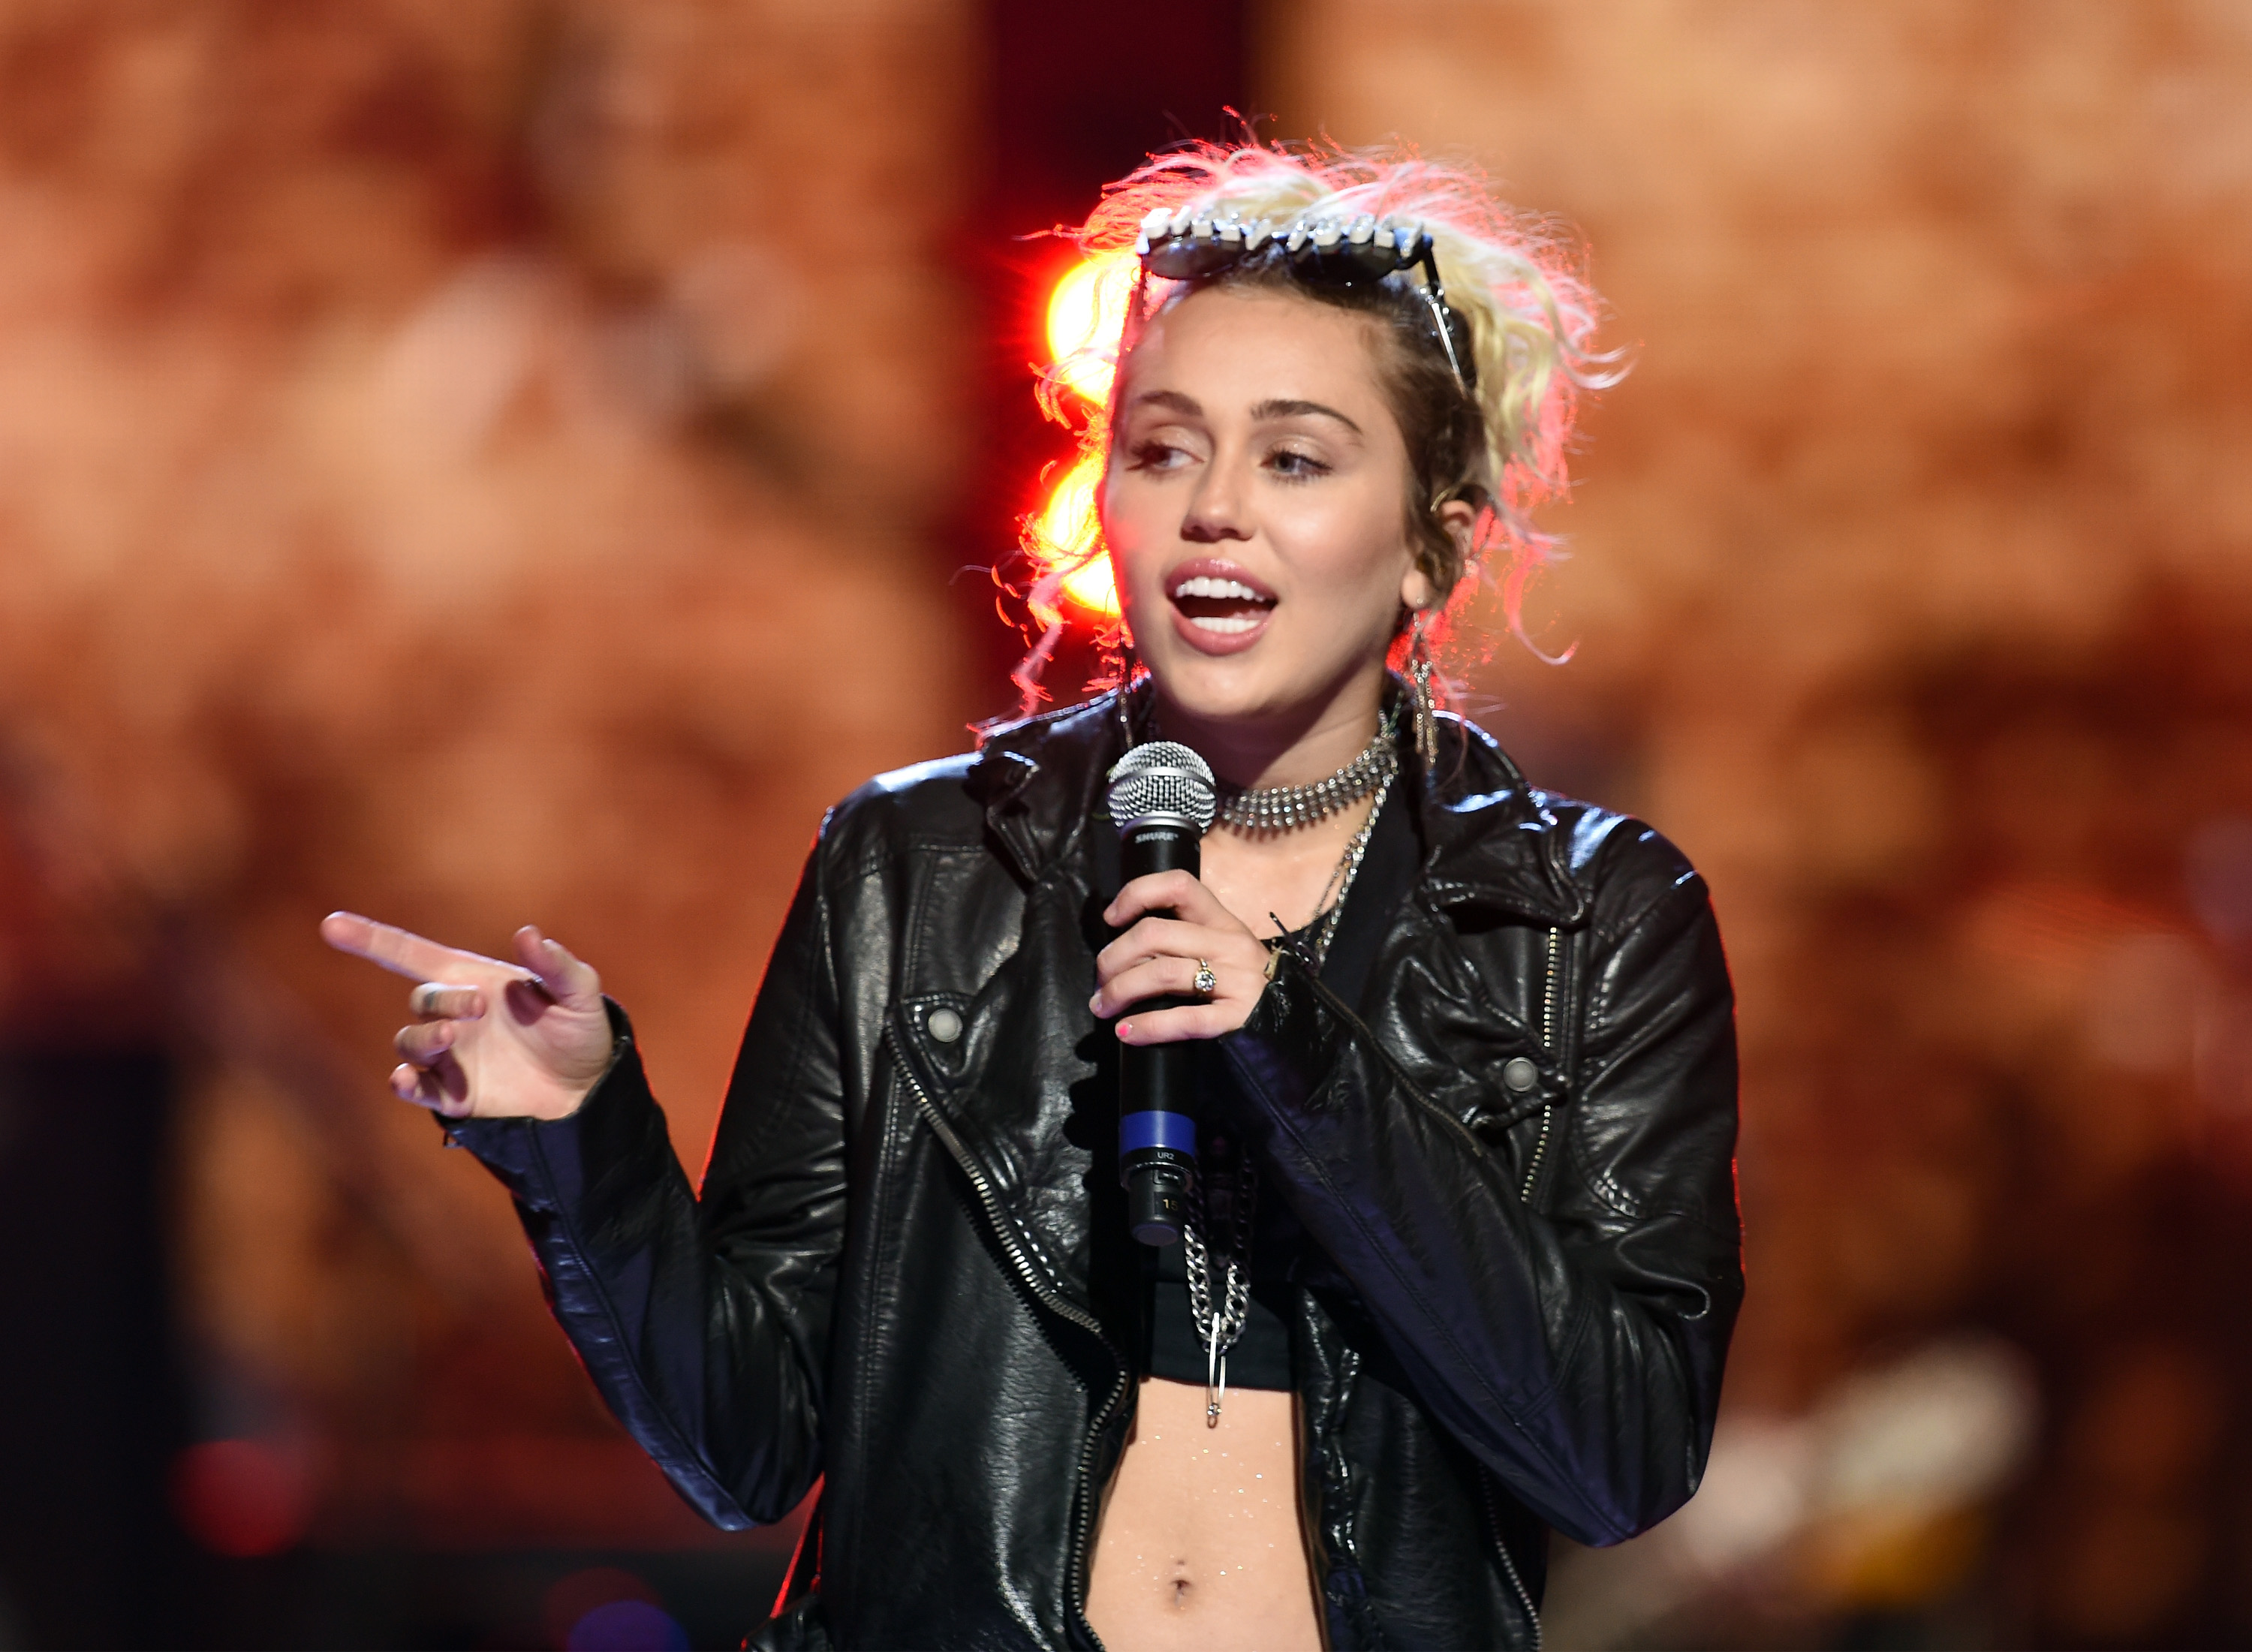 Miley Cyrus performs onstage at the 2016 iHeartRadio Music Festival at T-Mobile Arena on September 23, 2016 in Las Vegas, Nevada. (Kevin Winter—Getty Images)